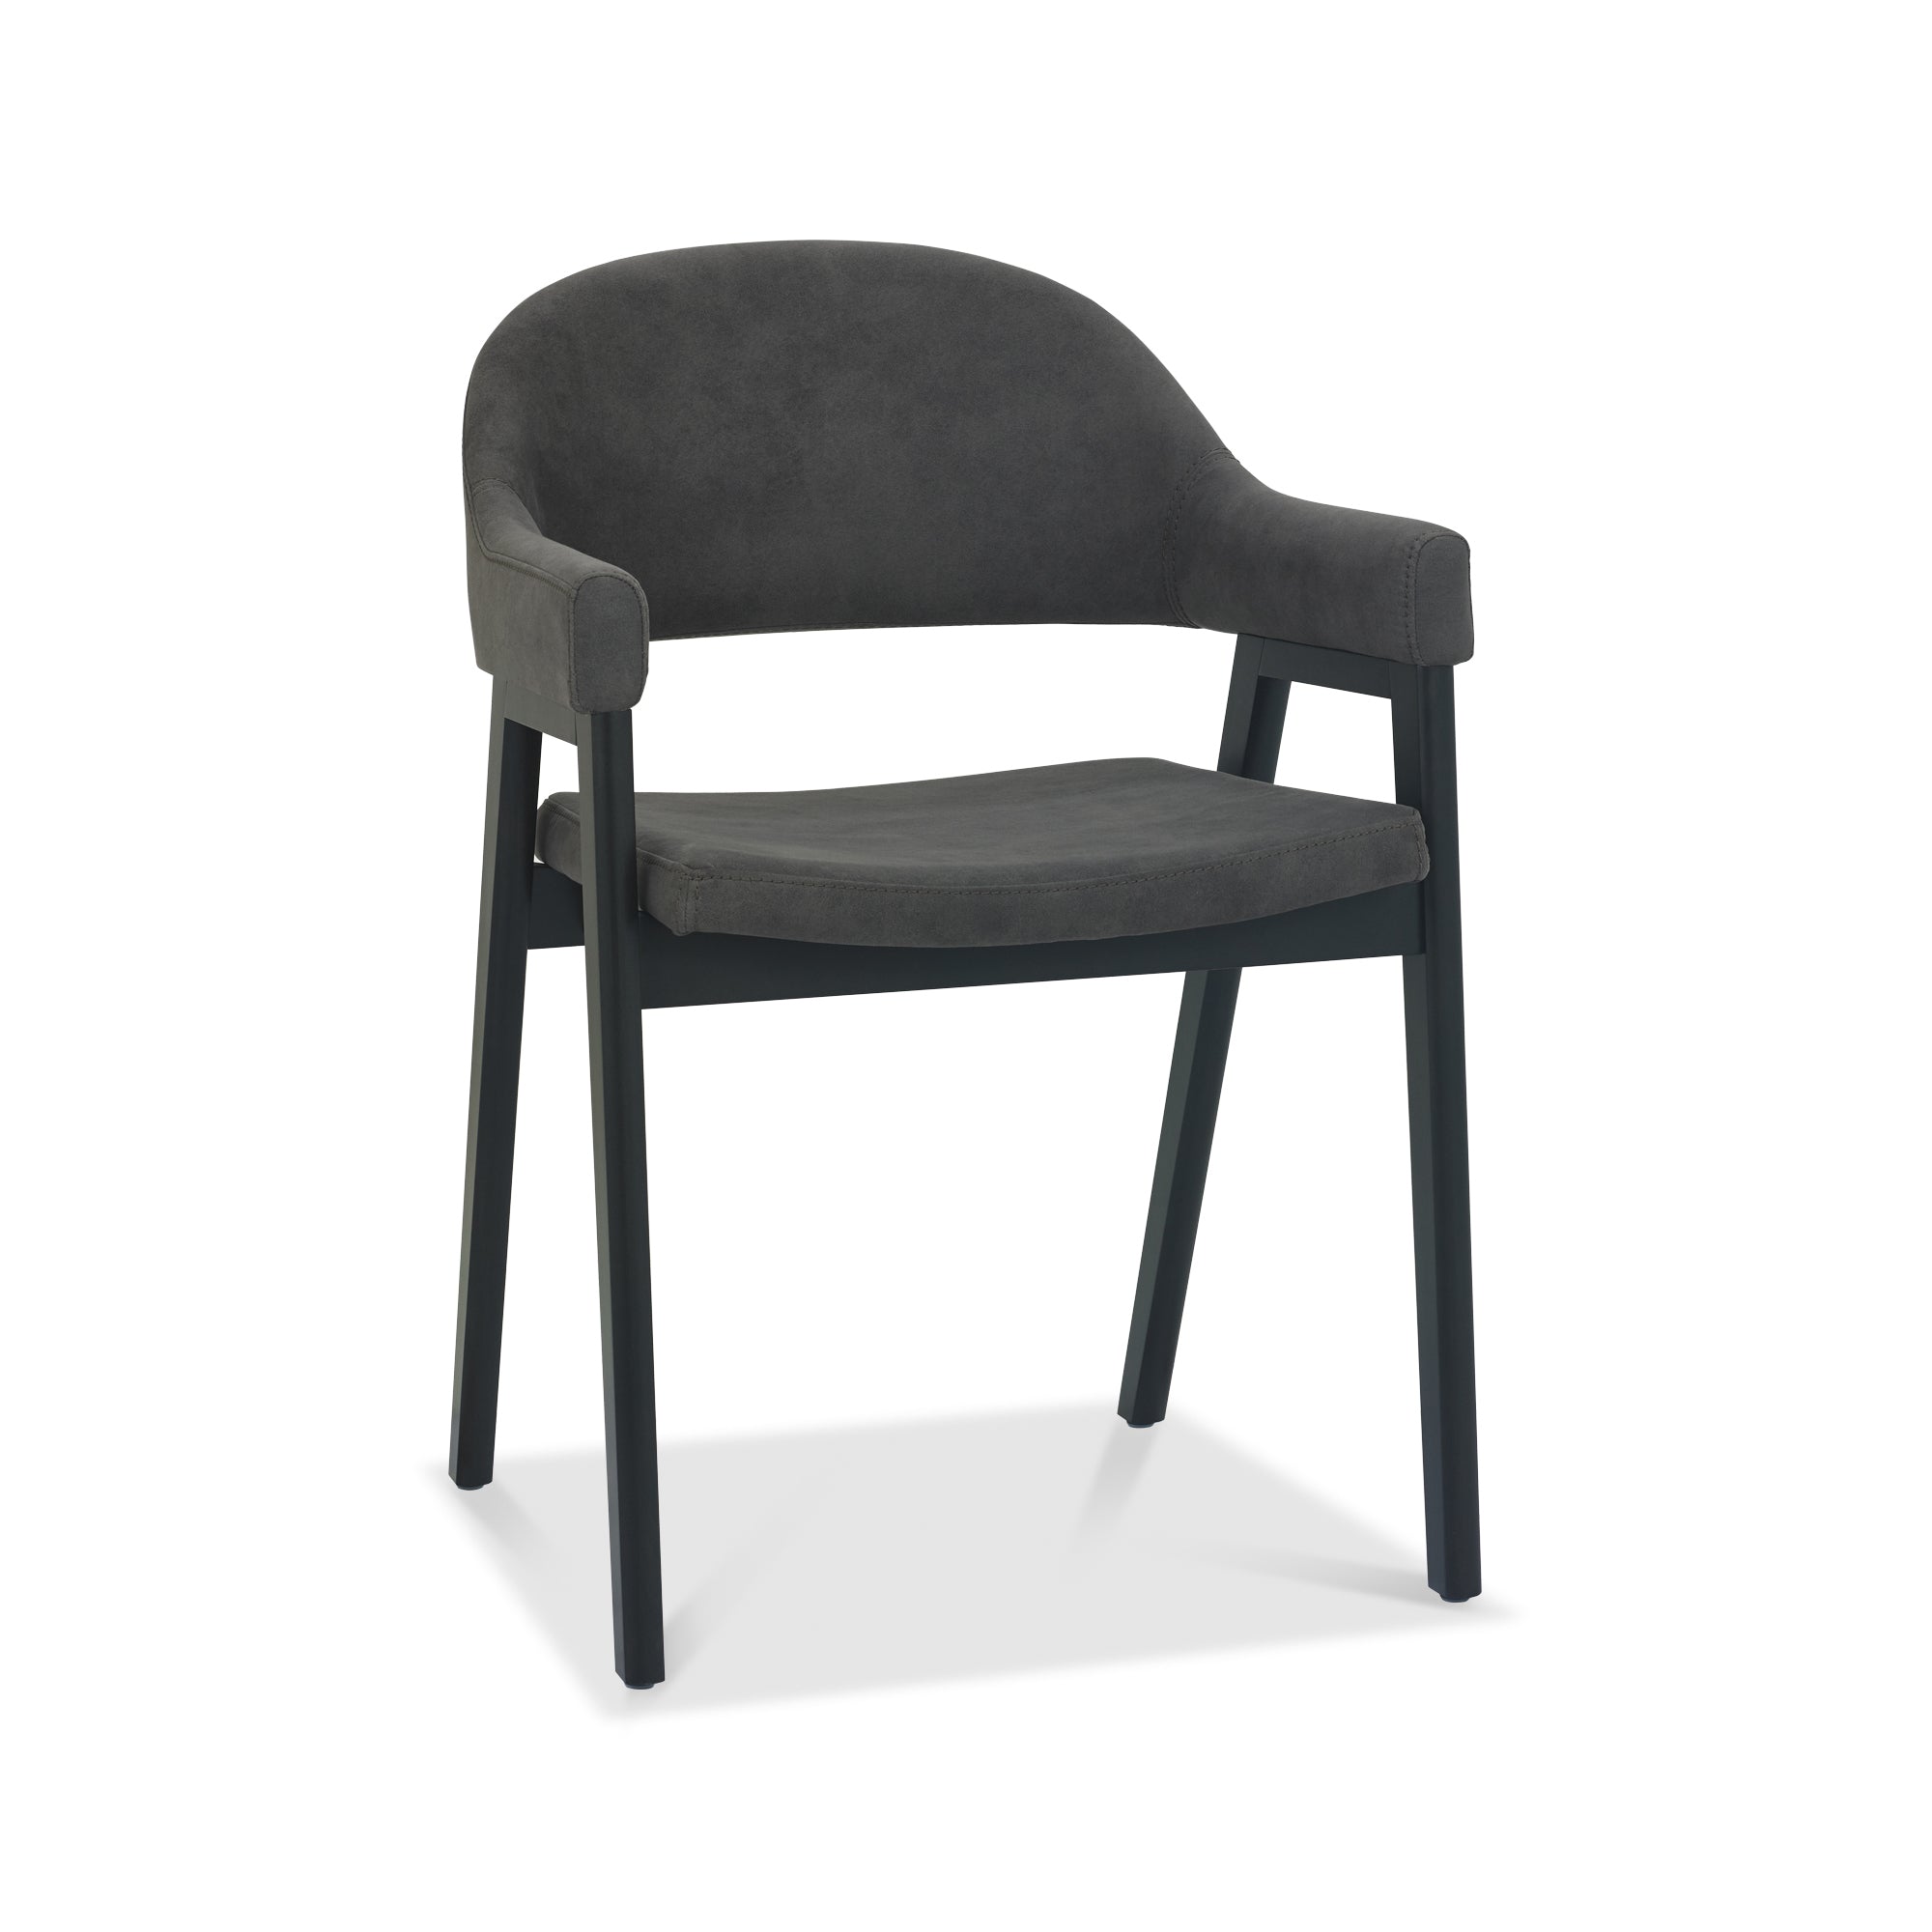 Candice Upholstered Dining Chair with Arms - Dark Grey Fabric